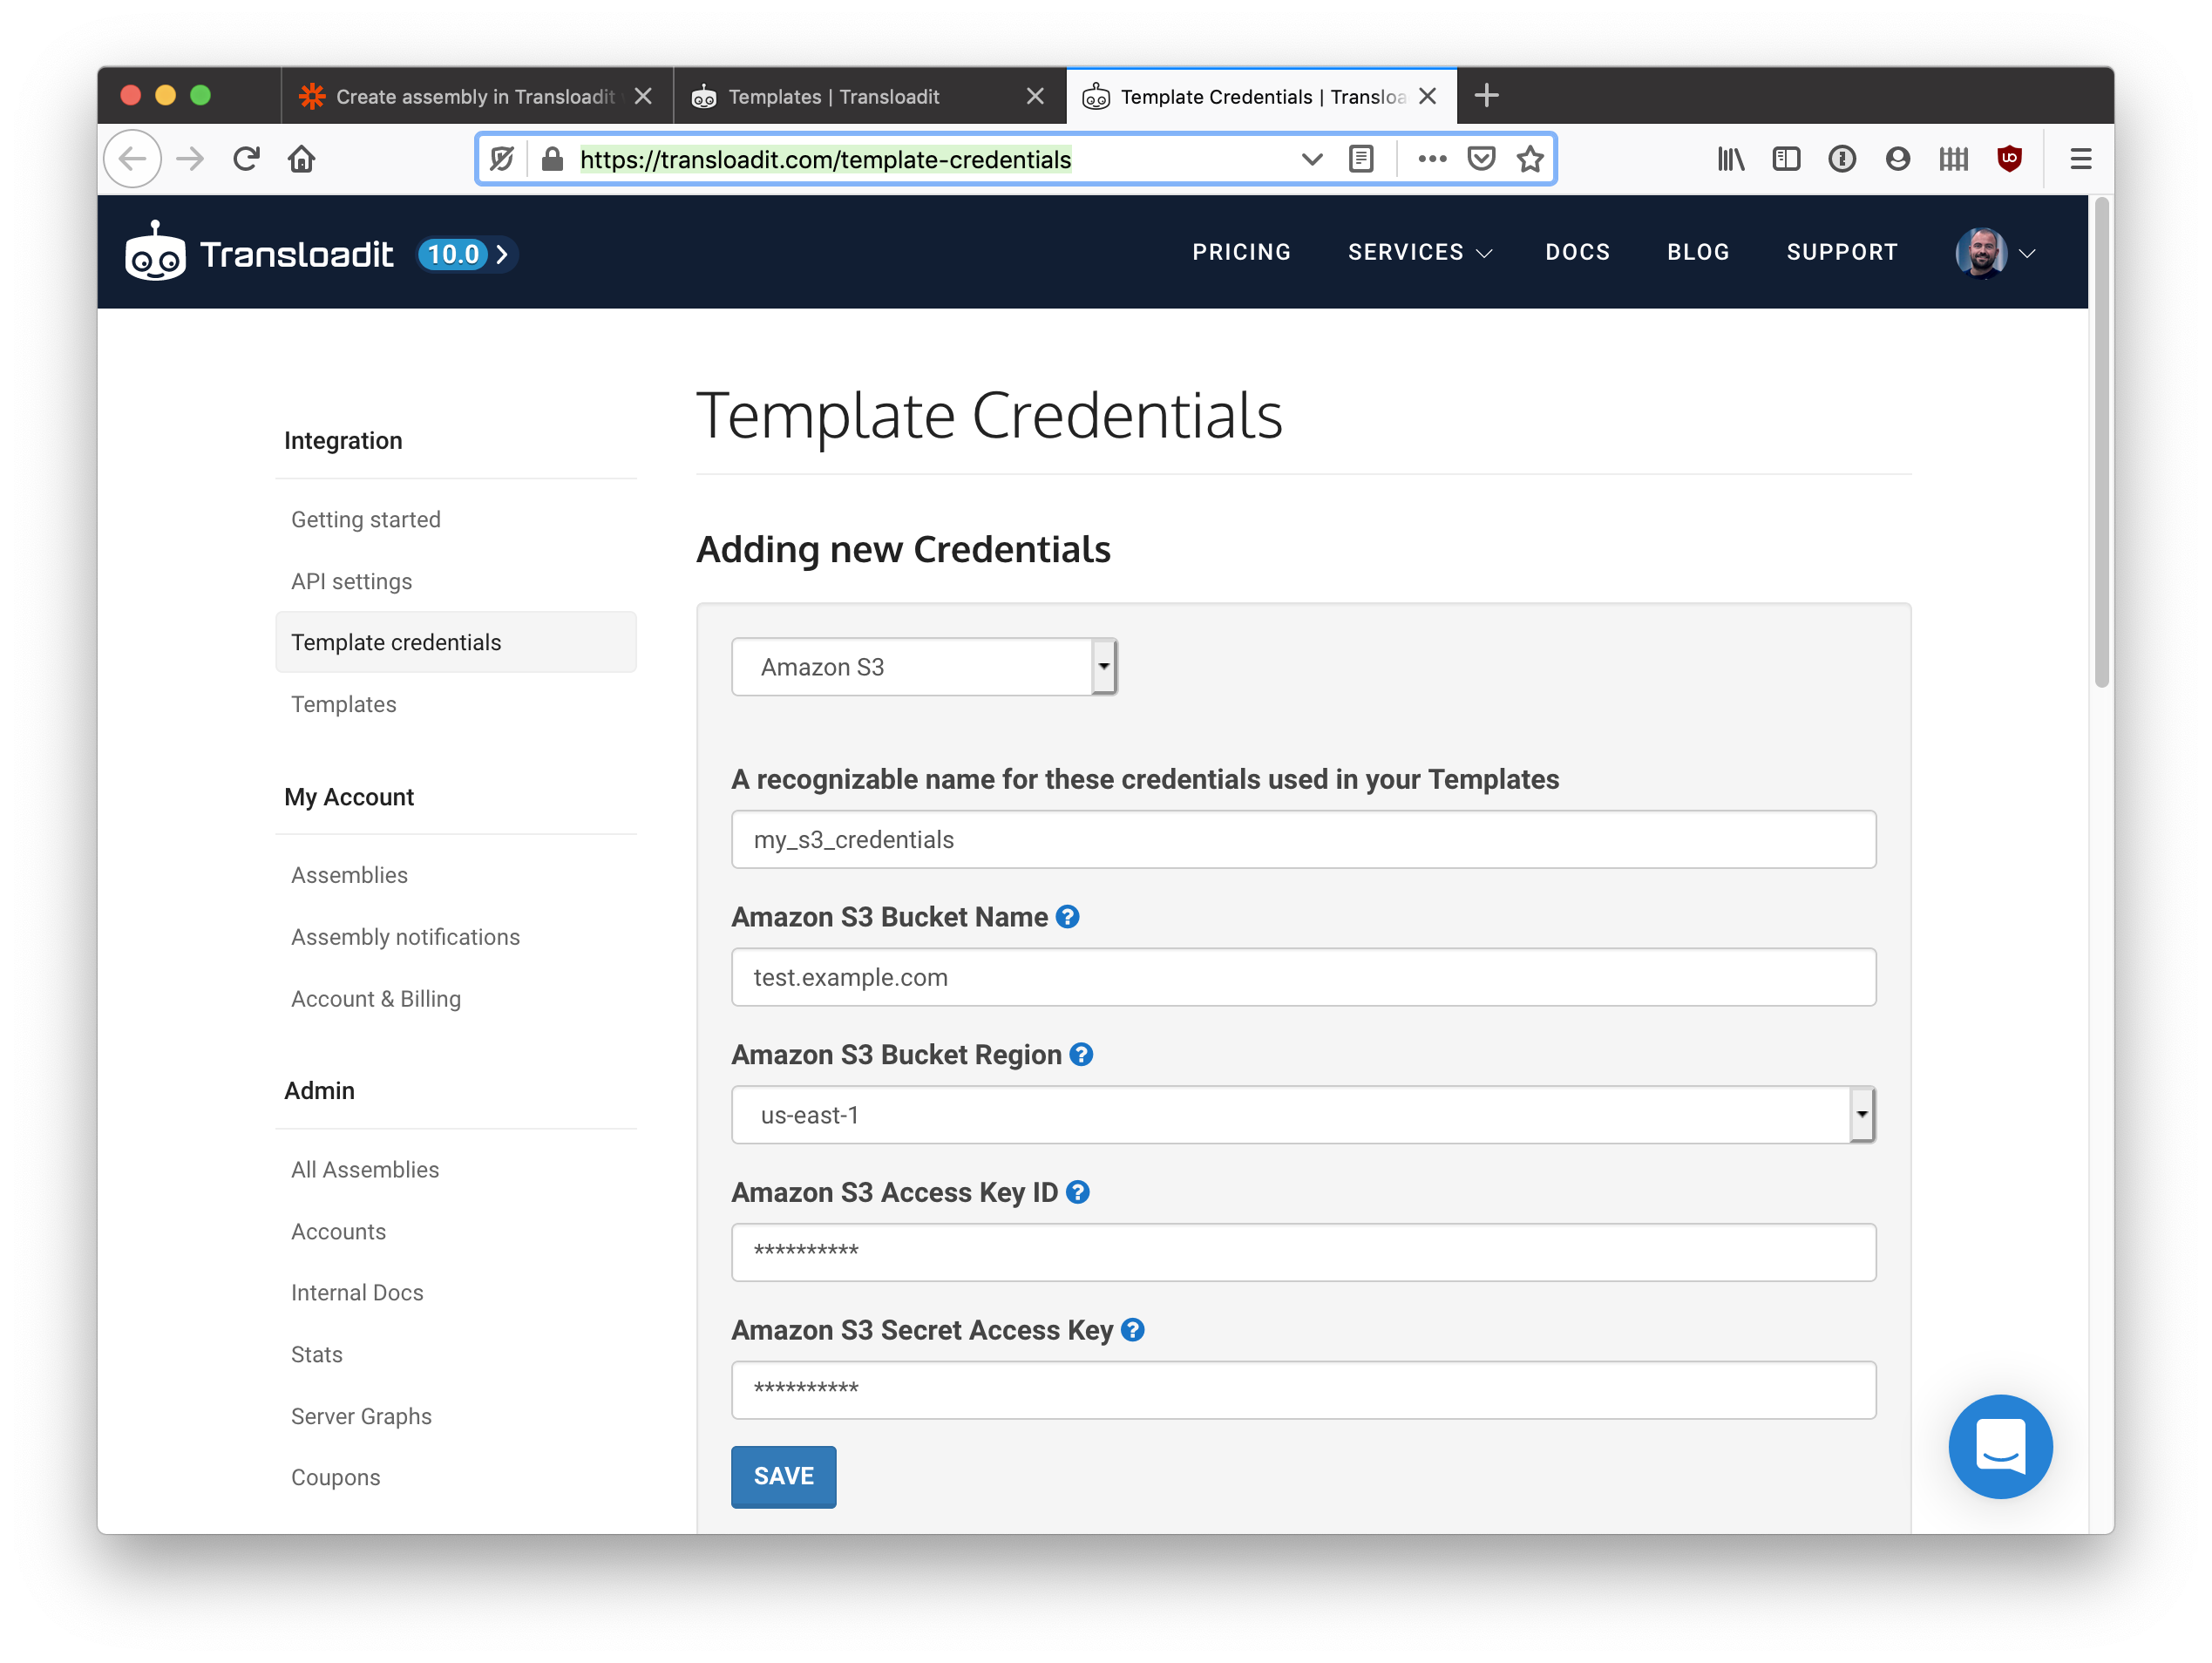 Adding a new set of Amazon S3 Credentials on the Transloadit Template Credentials page